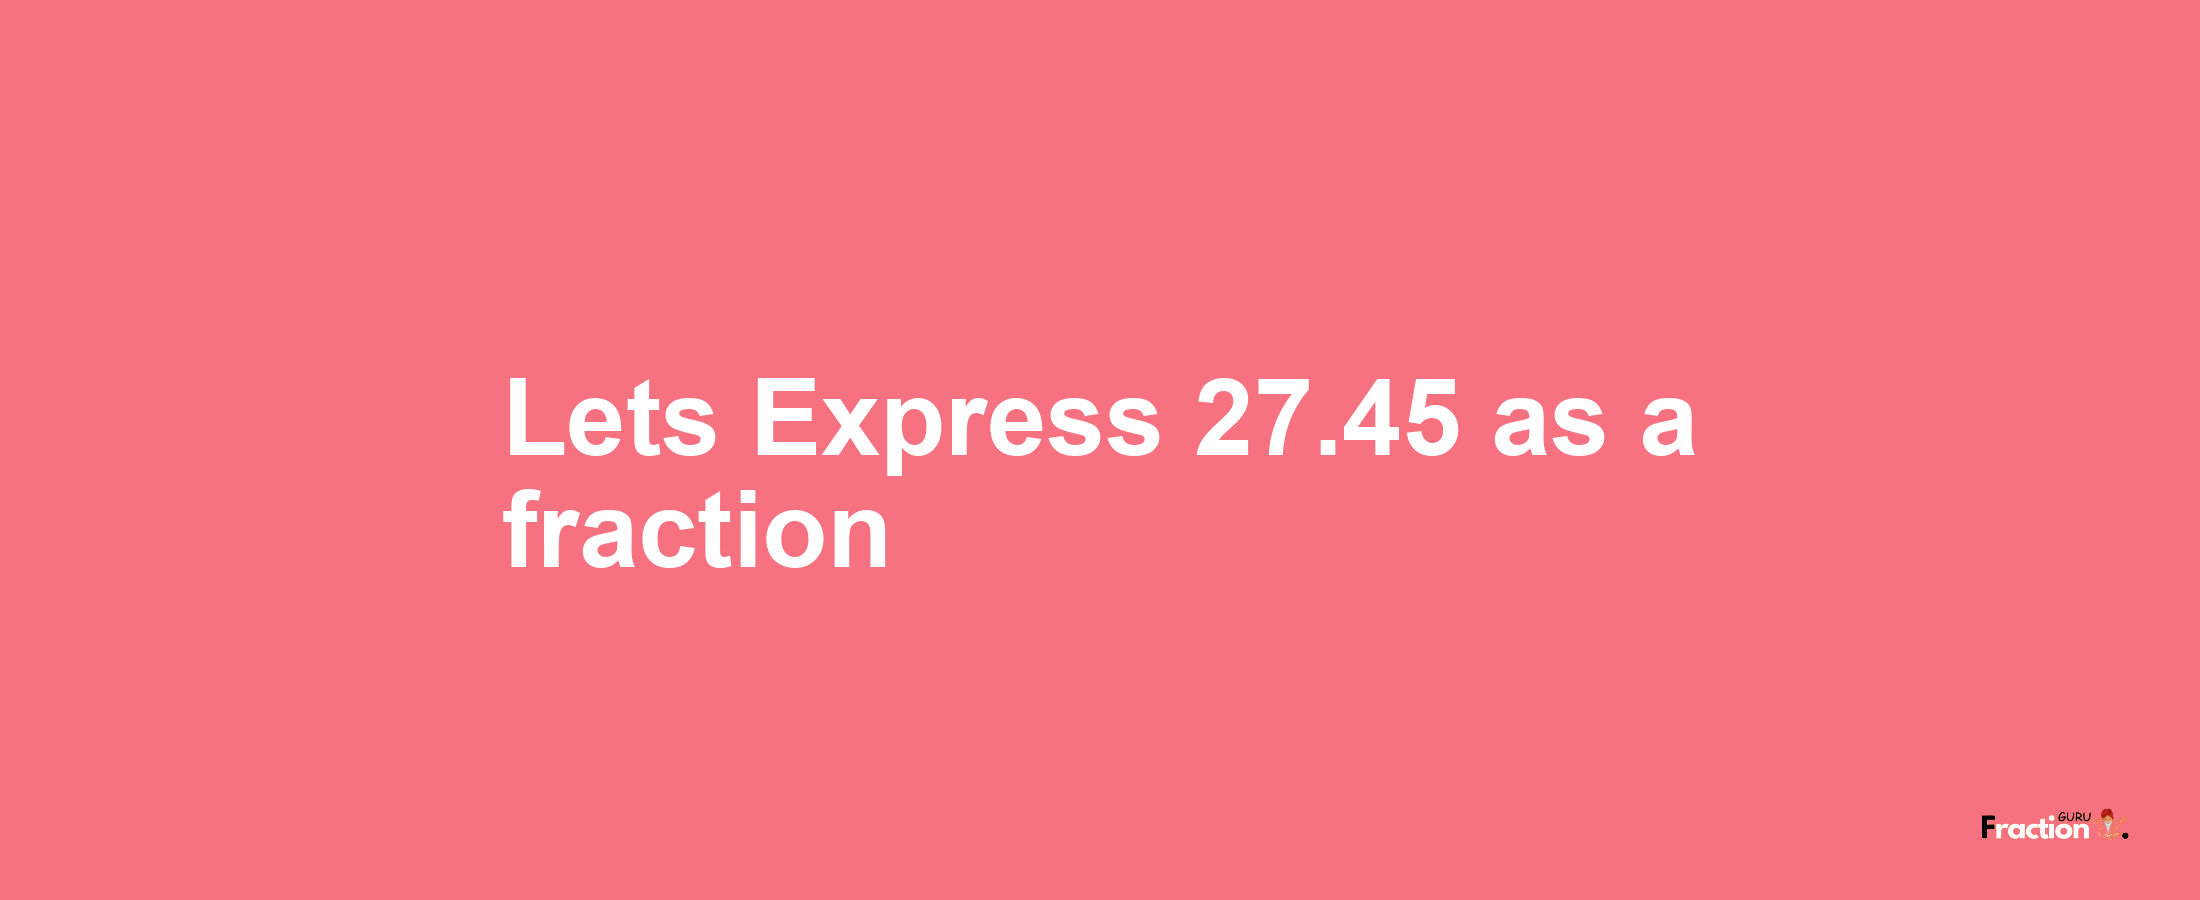 Lets Express 27.45 as afraction